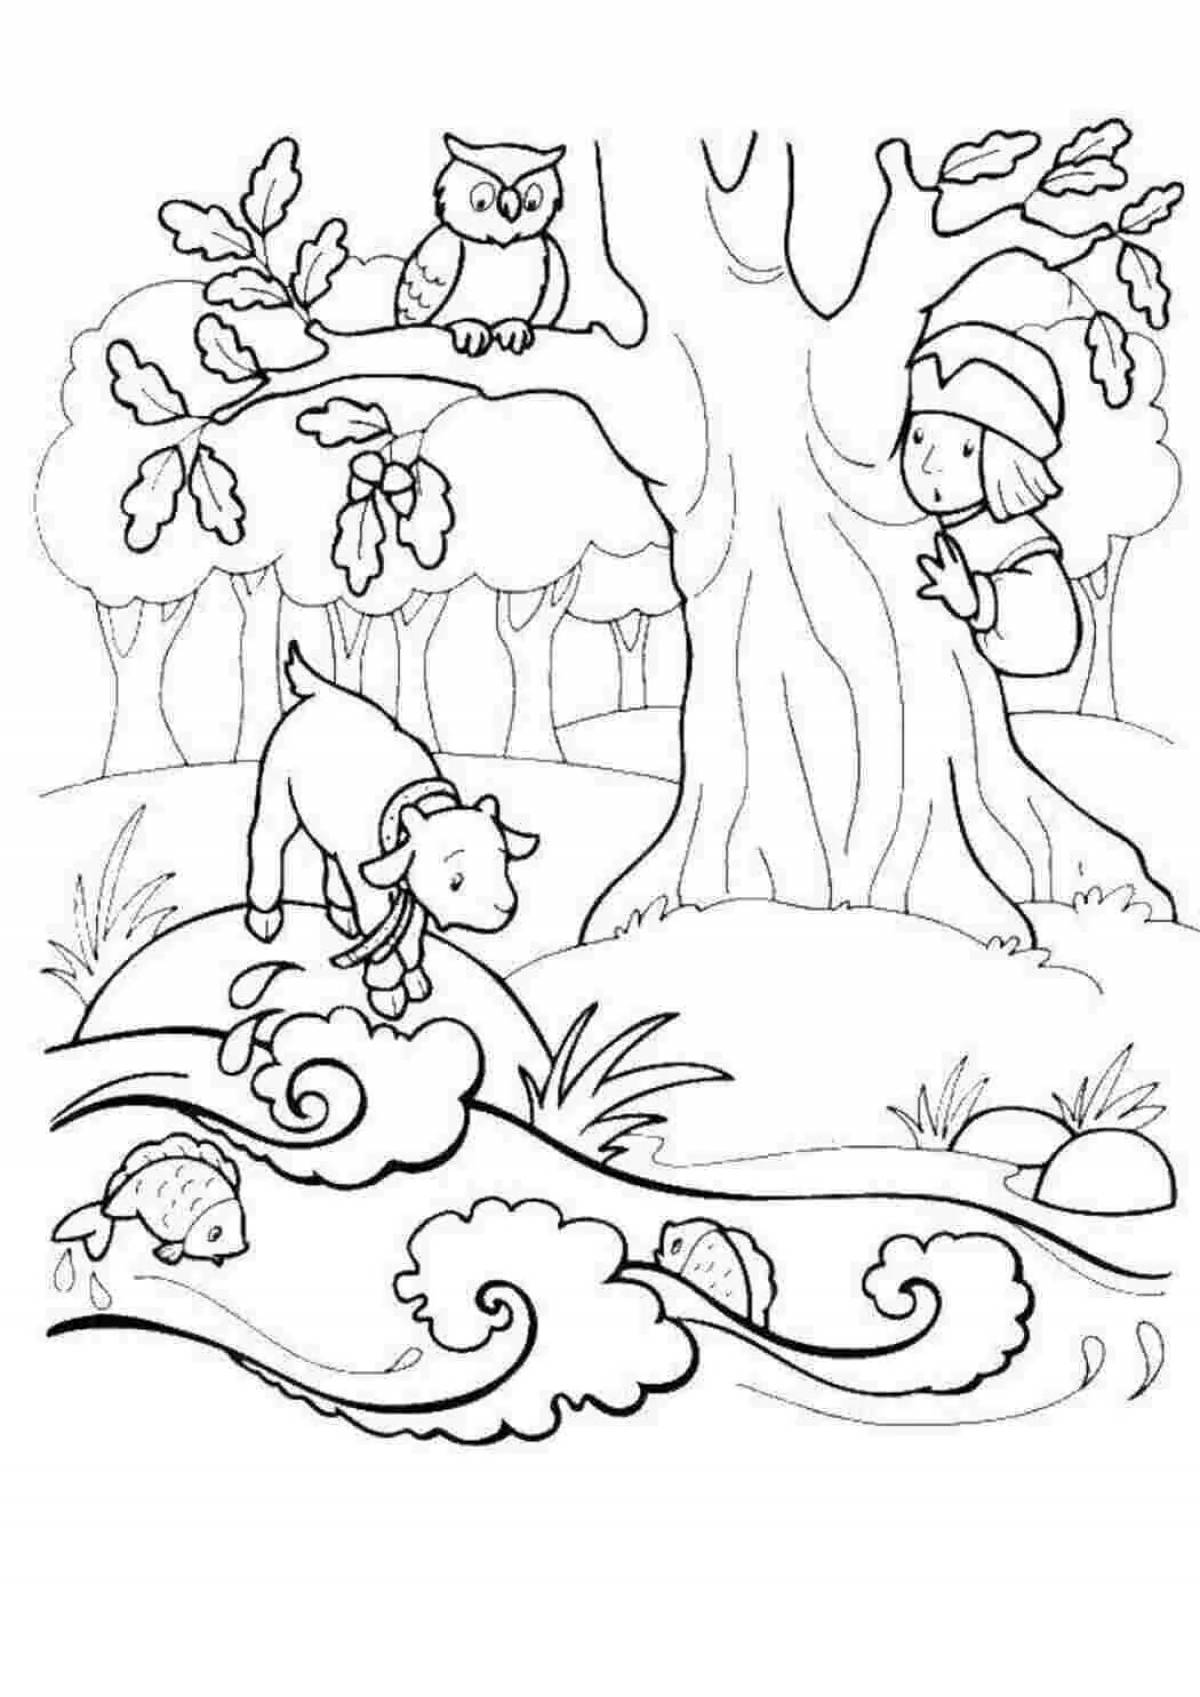 Vivacious coloring page fear has big eyes for a fairy tale